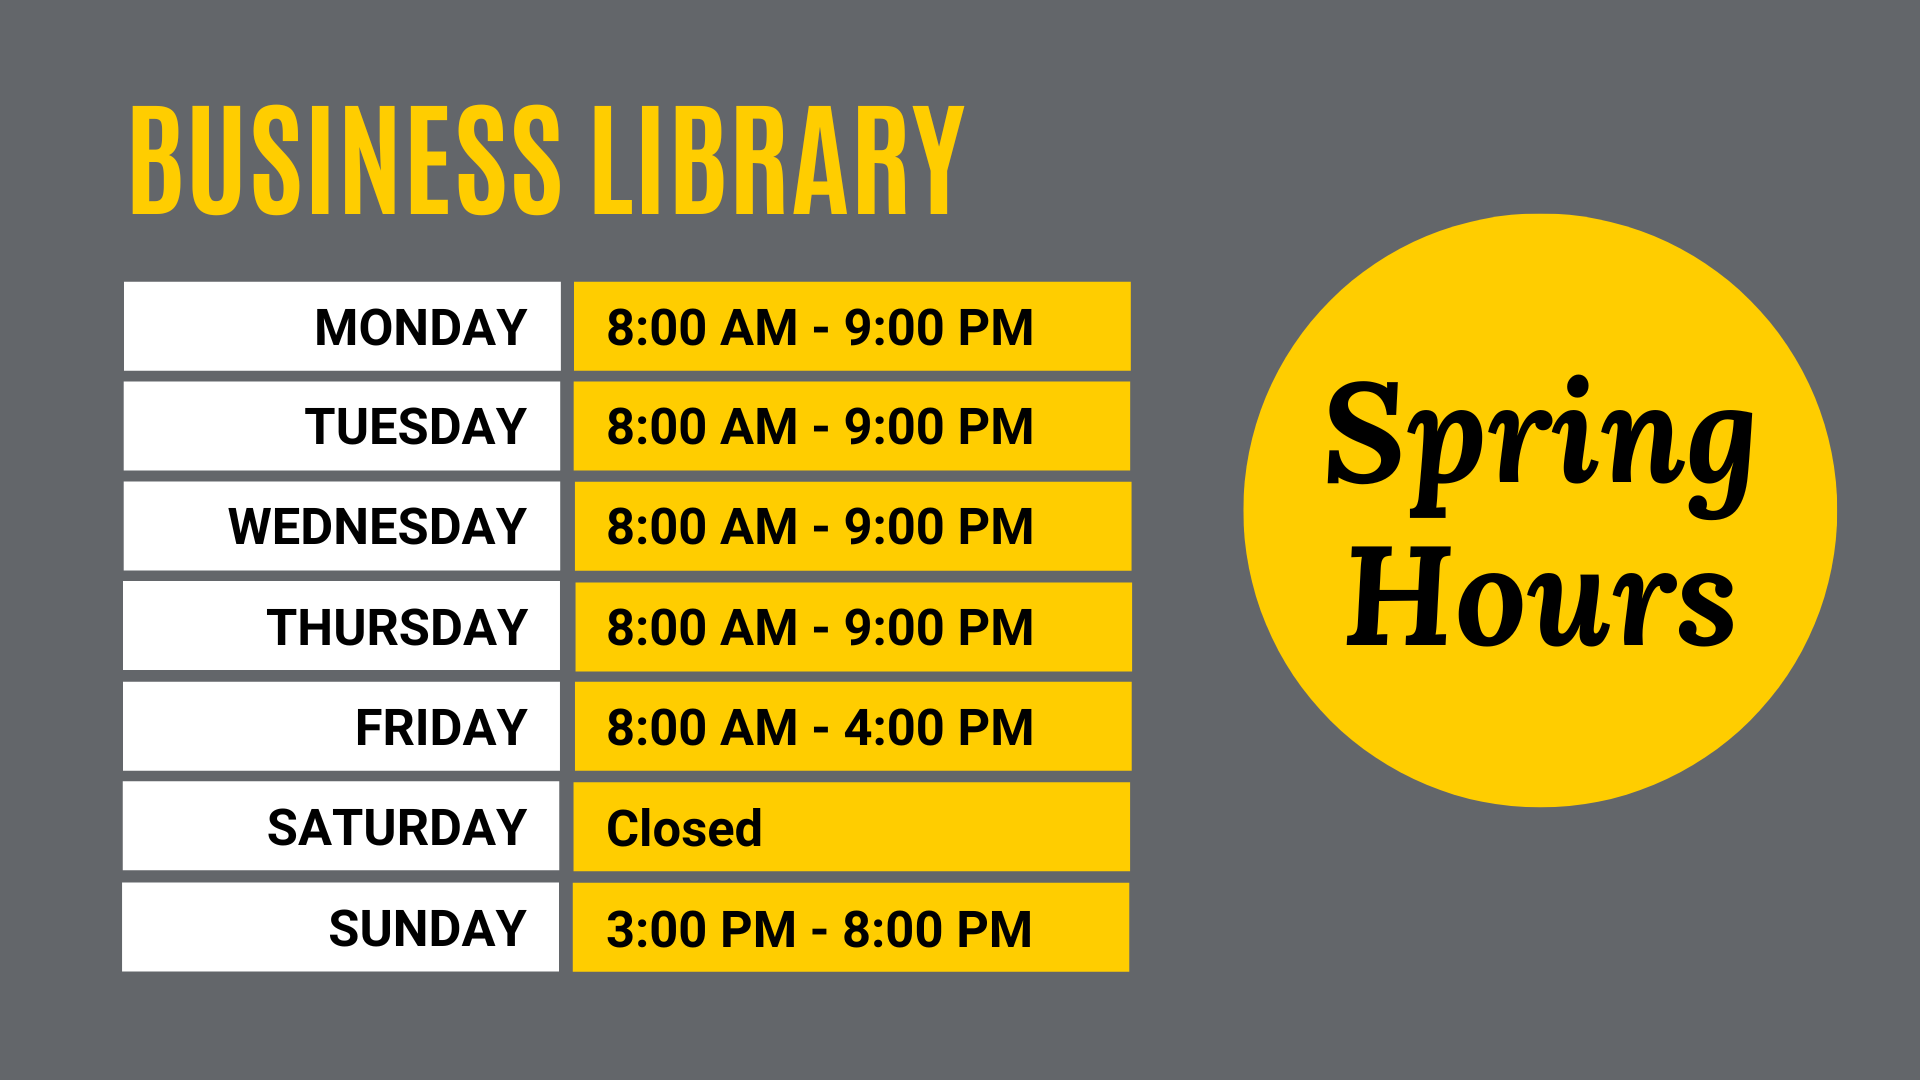 Business Library Hours